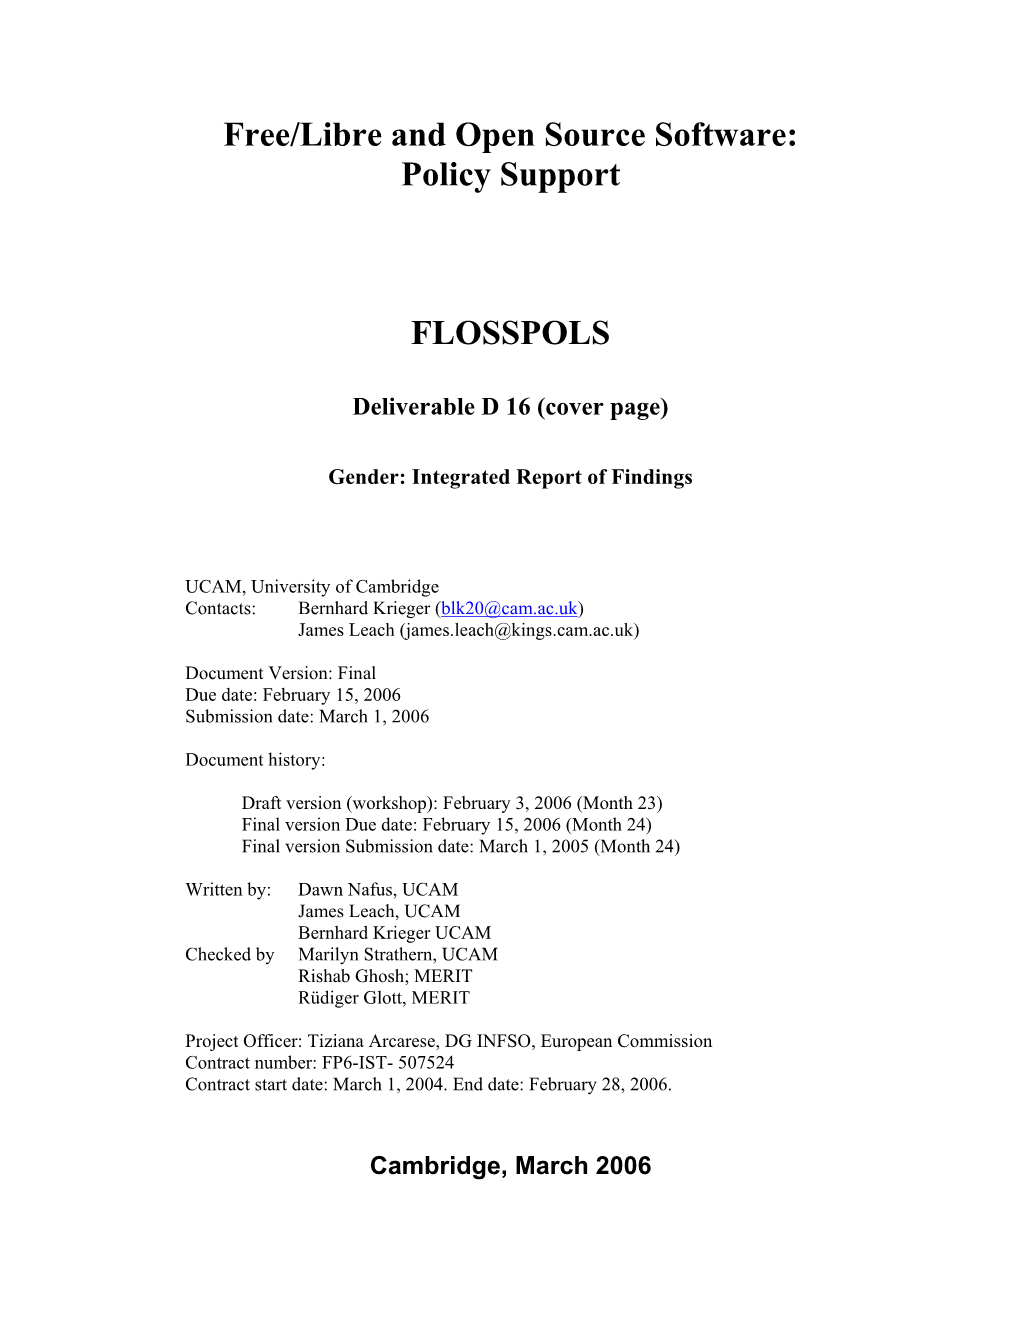 Free/Libre and Open Source Software: Policy Support FLOSSPOLS